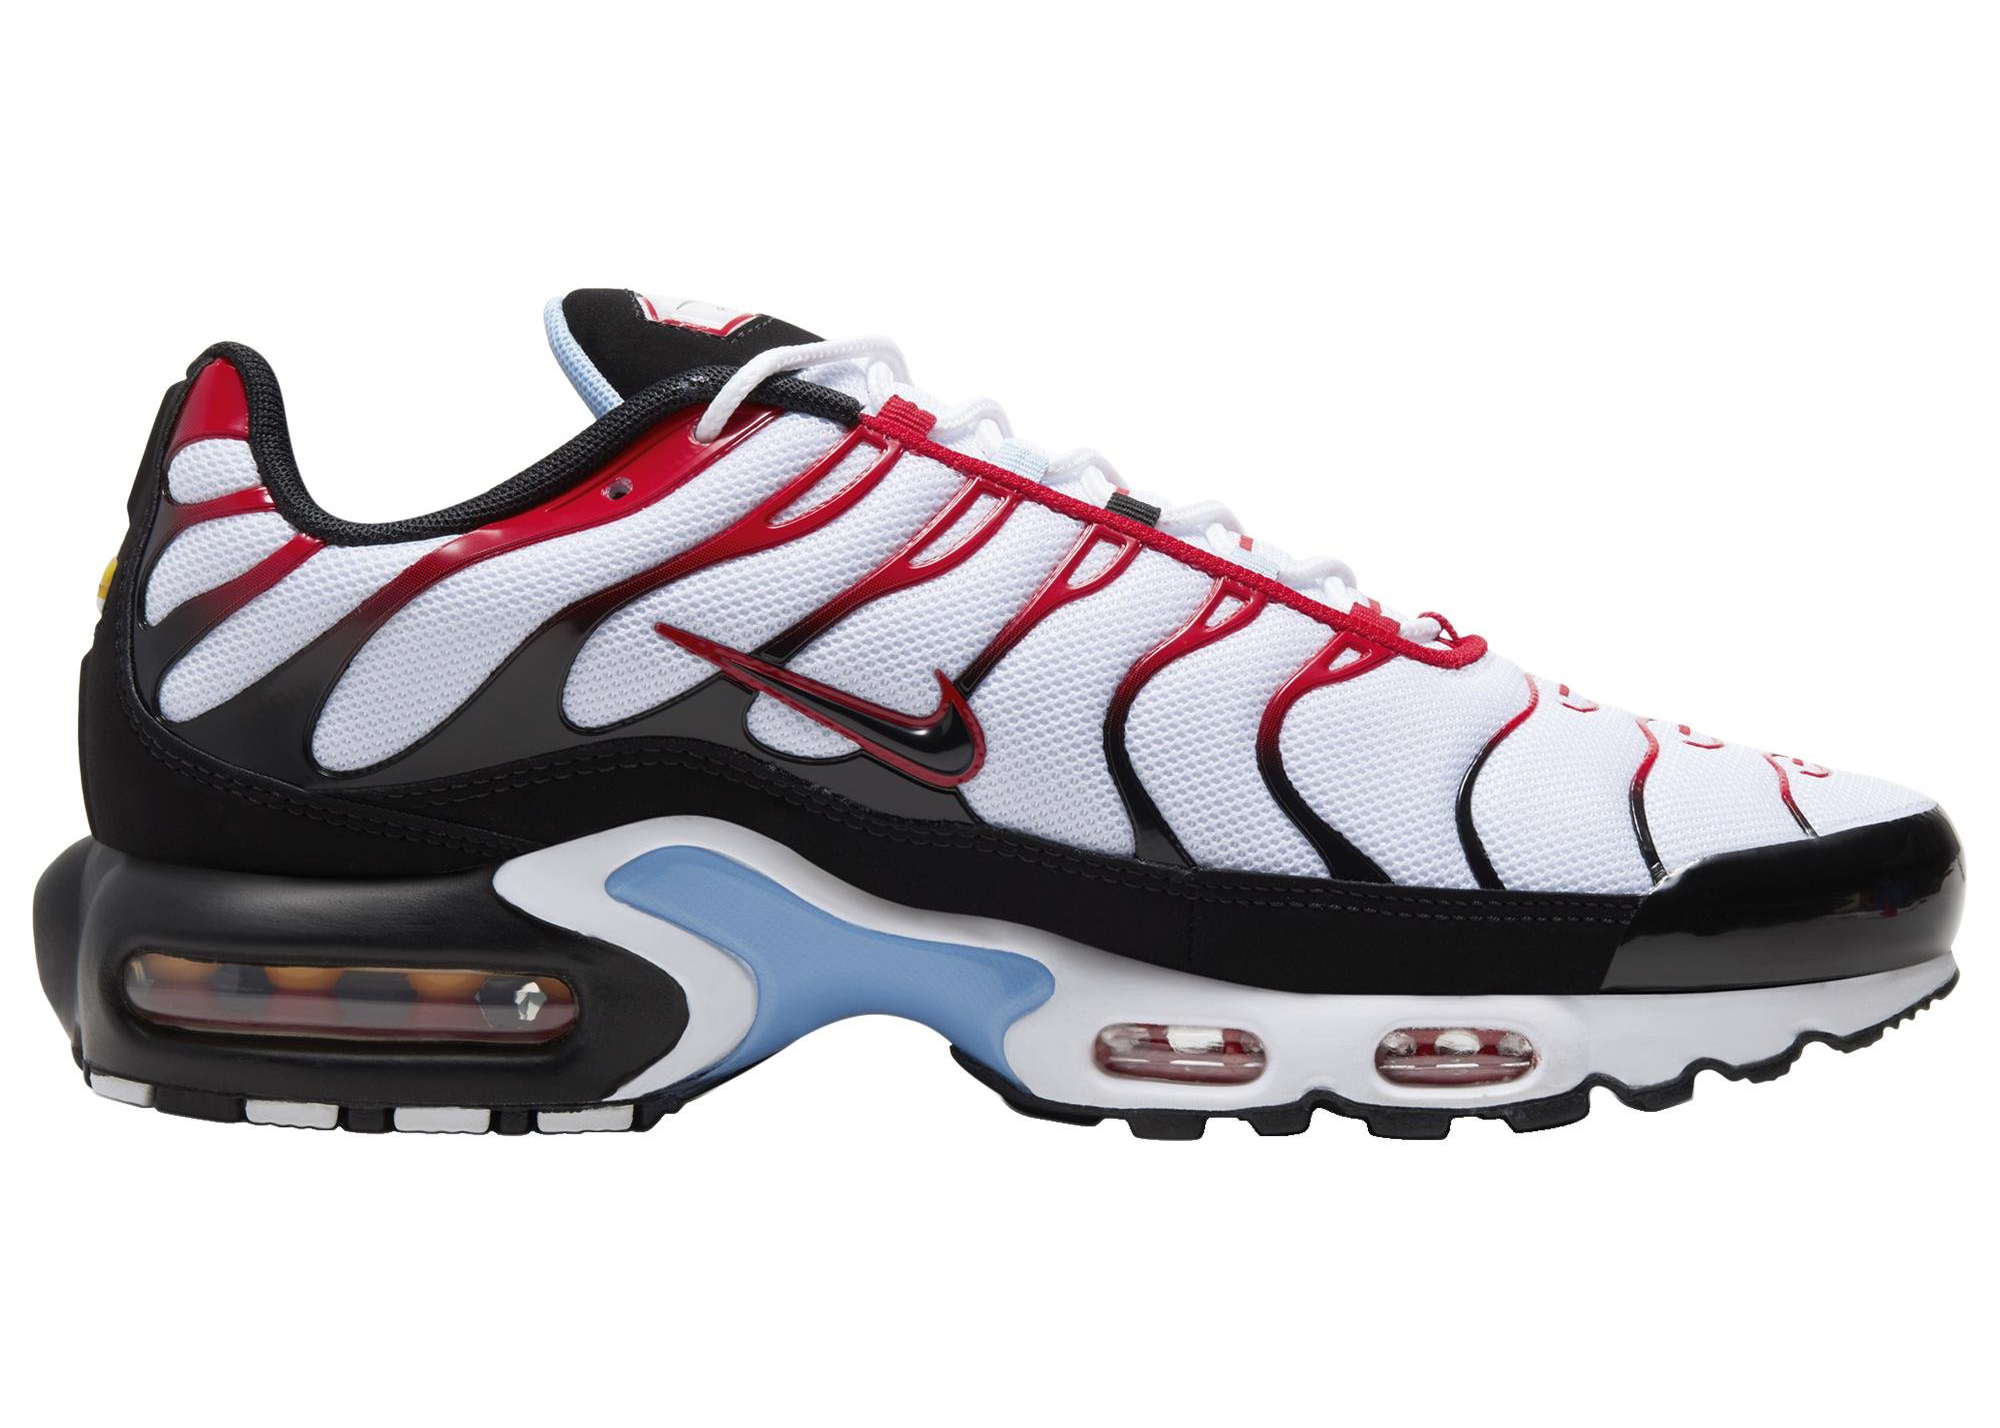 red and blue air max plus